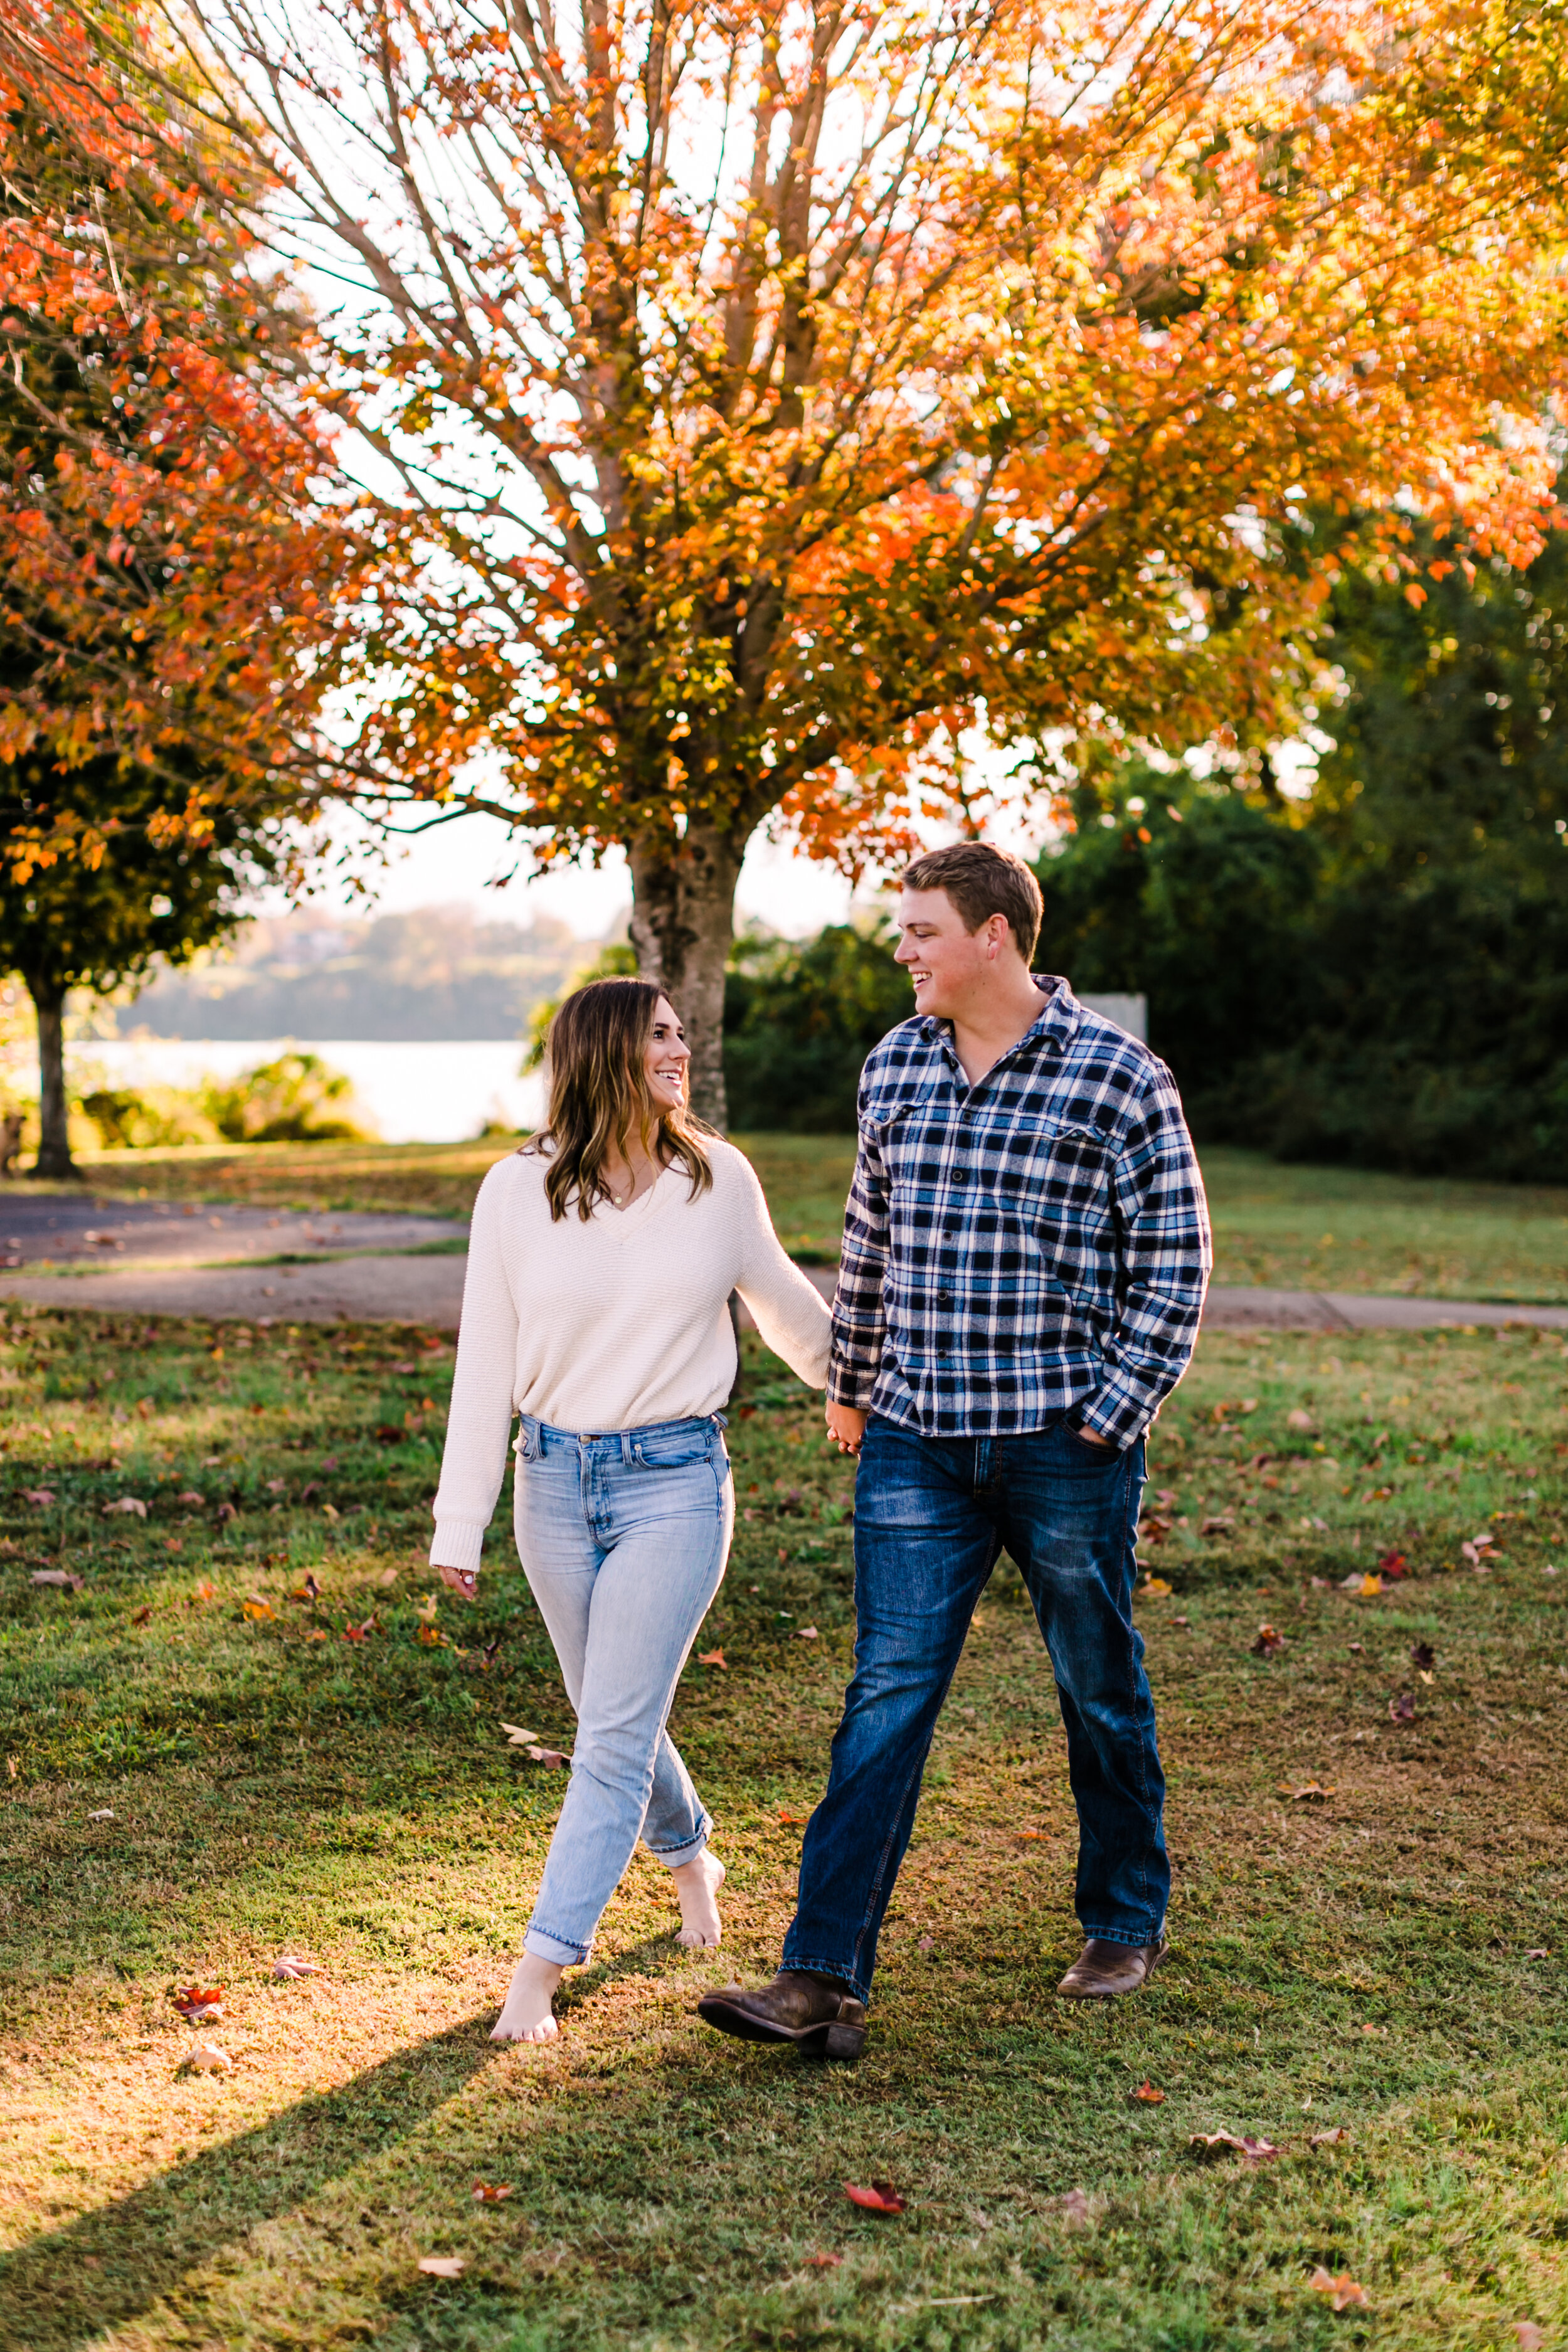 Tennessee+Fall+Engagement+Photos+Puppy (4 of 63).jpg